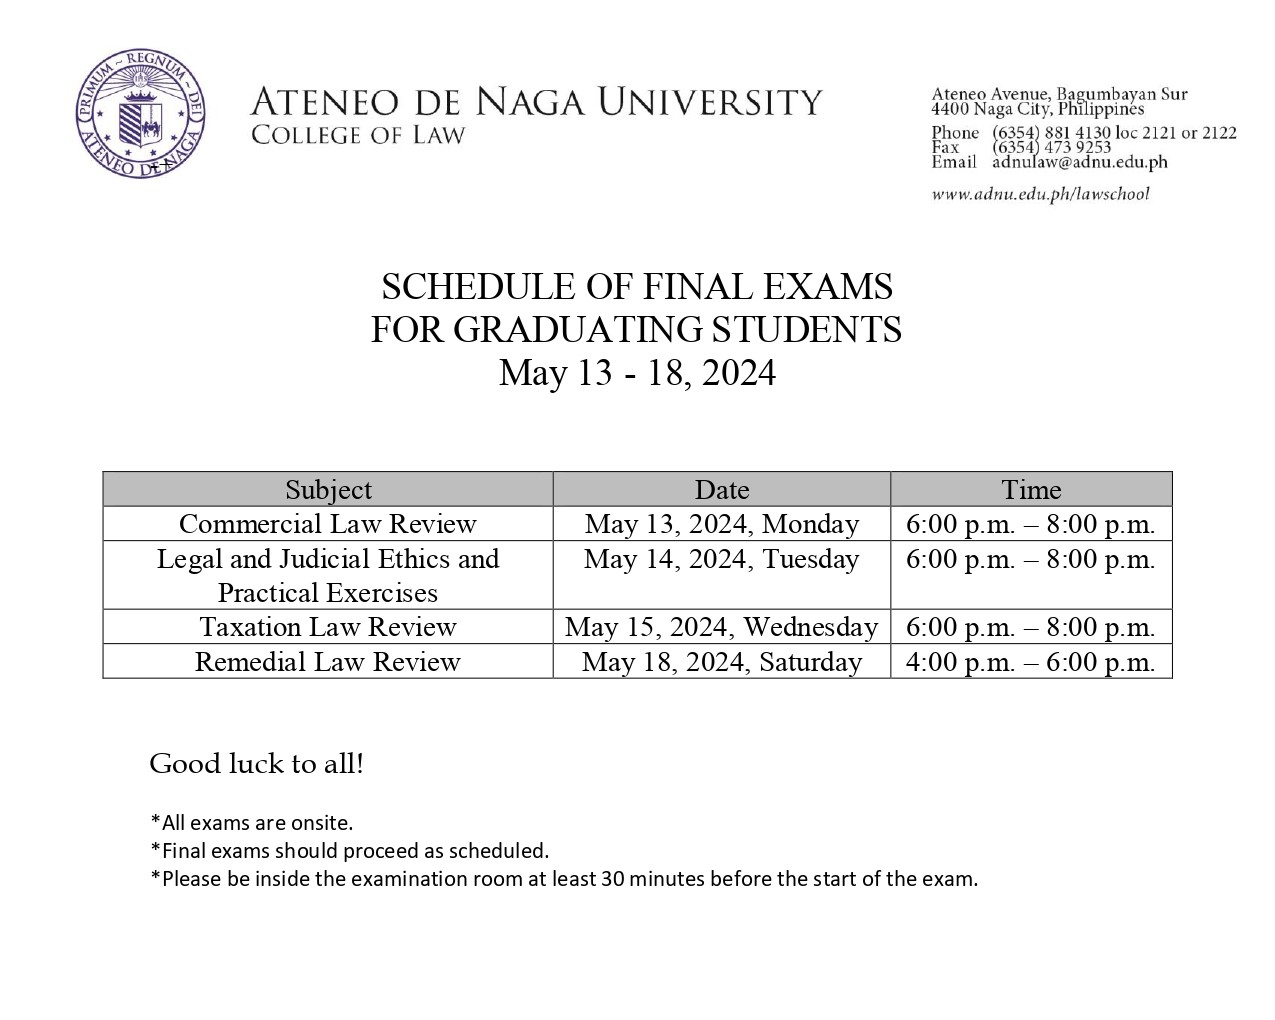 SCHEDULE OF FINAL EXAMS  FOR GRADUATING STUDENTS